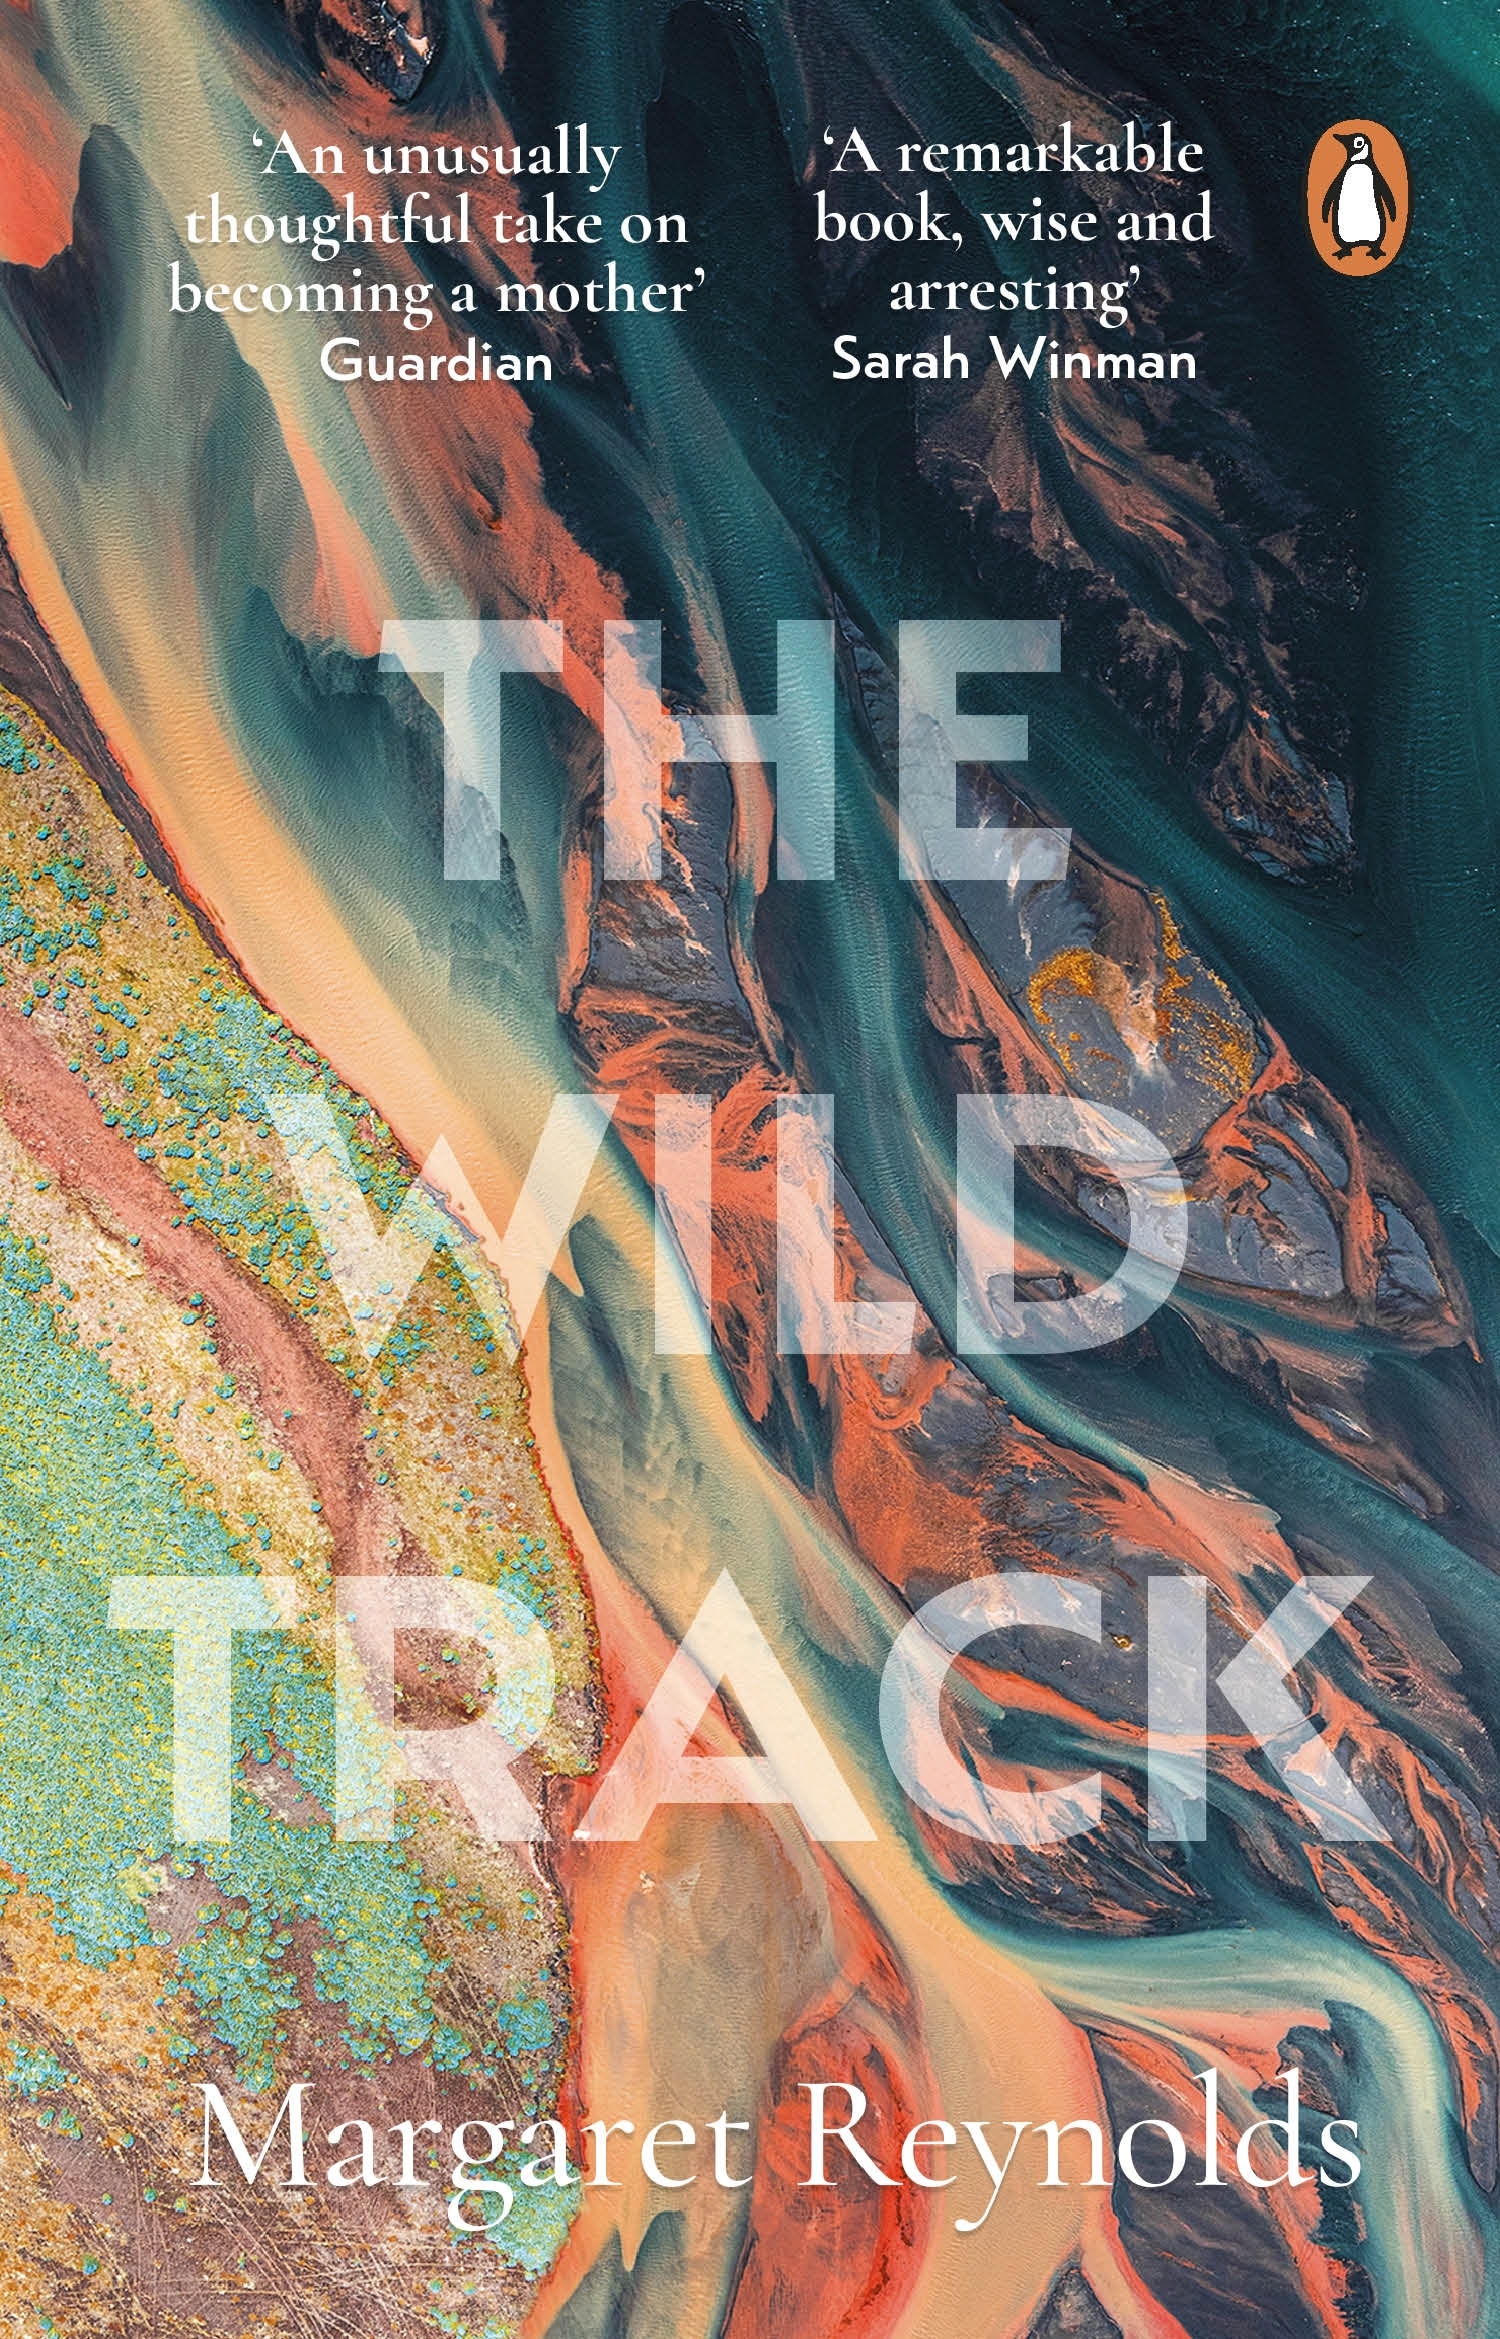 Book “The Wild Track” by Margaret Reynolds — February 24, 2022